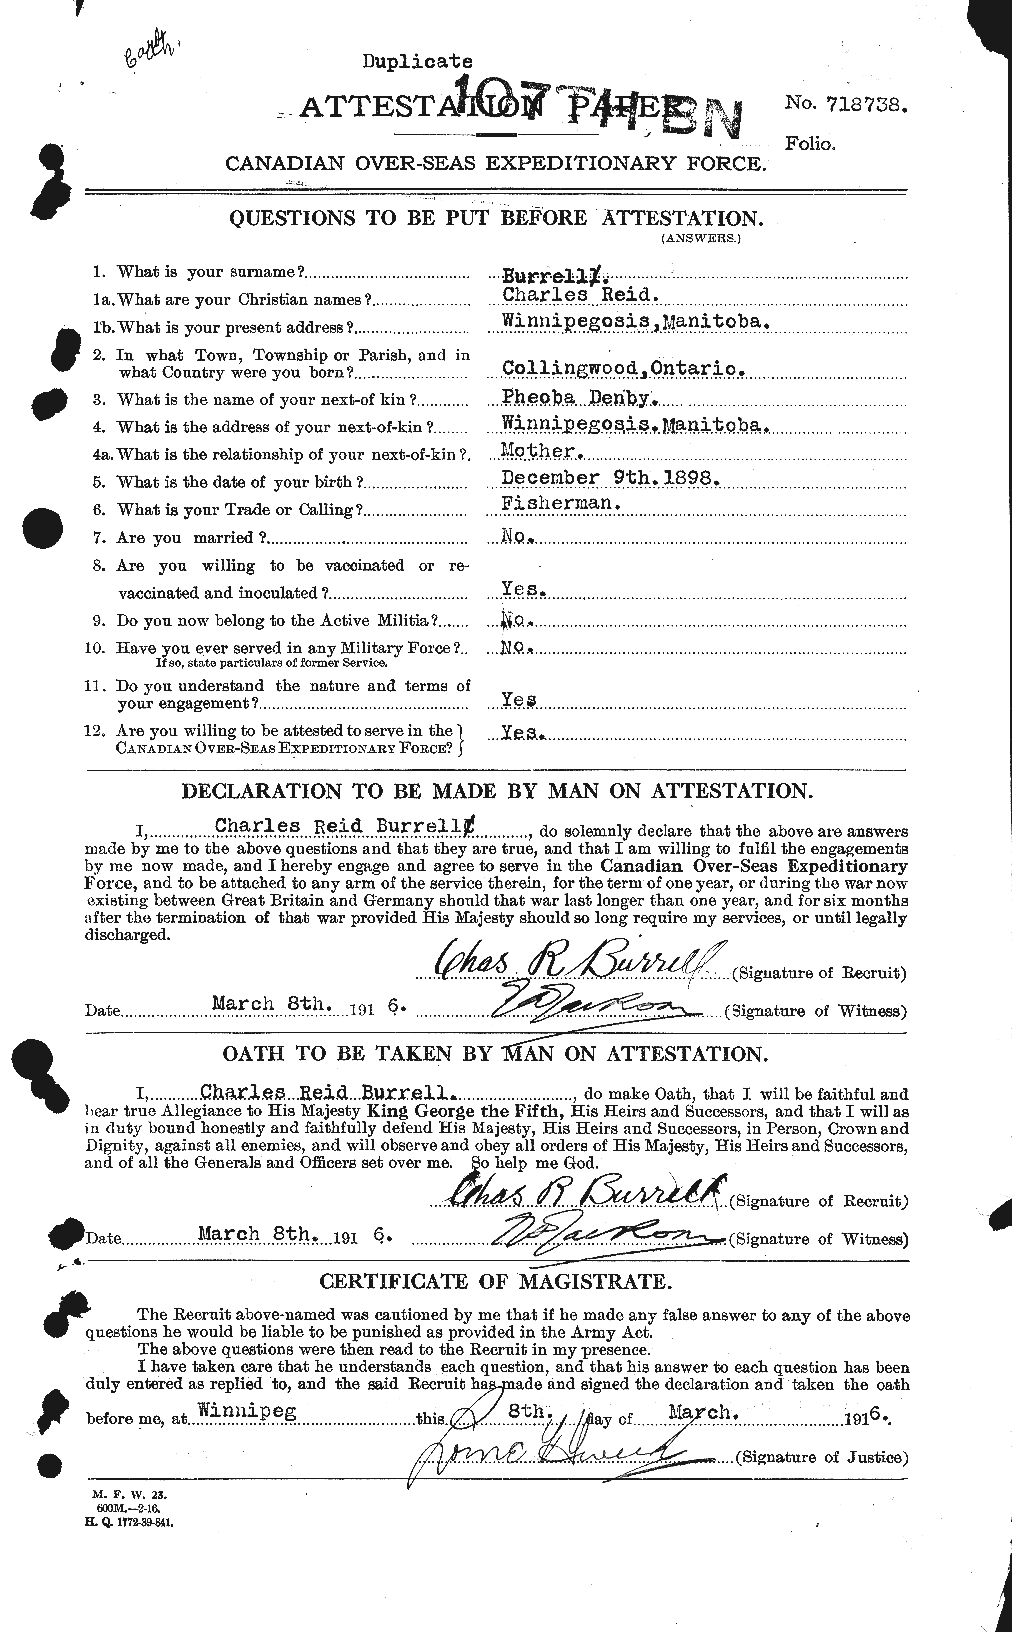 Personnel Records of the First World War - CEF 273961a